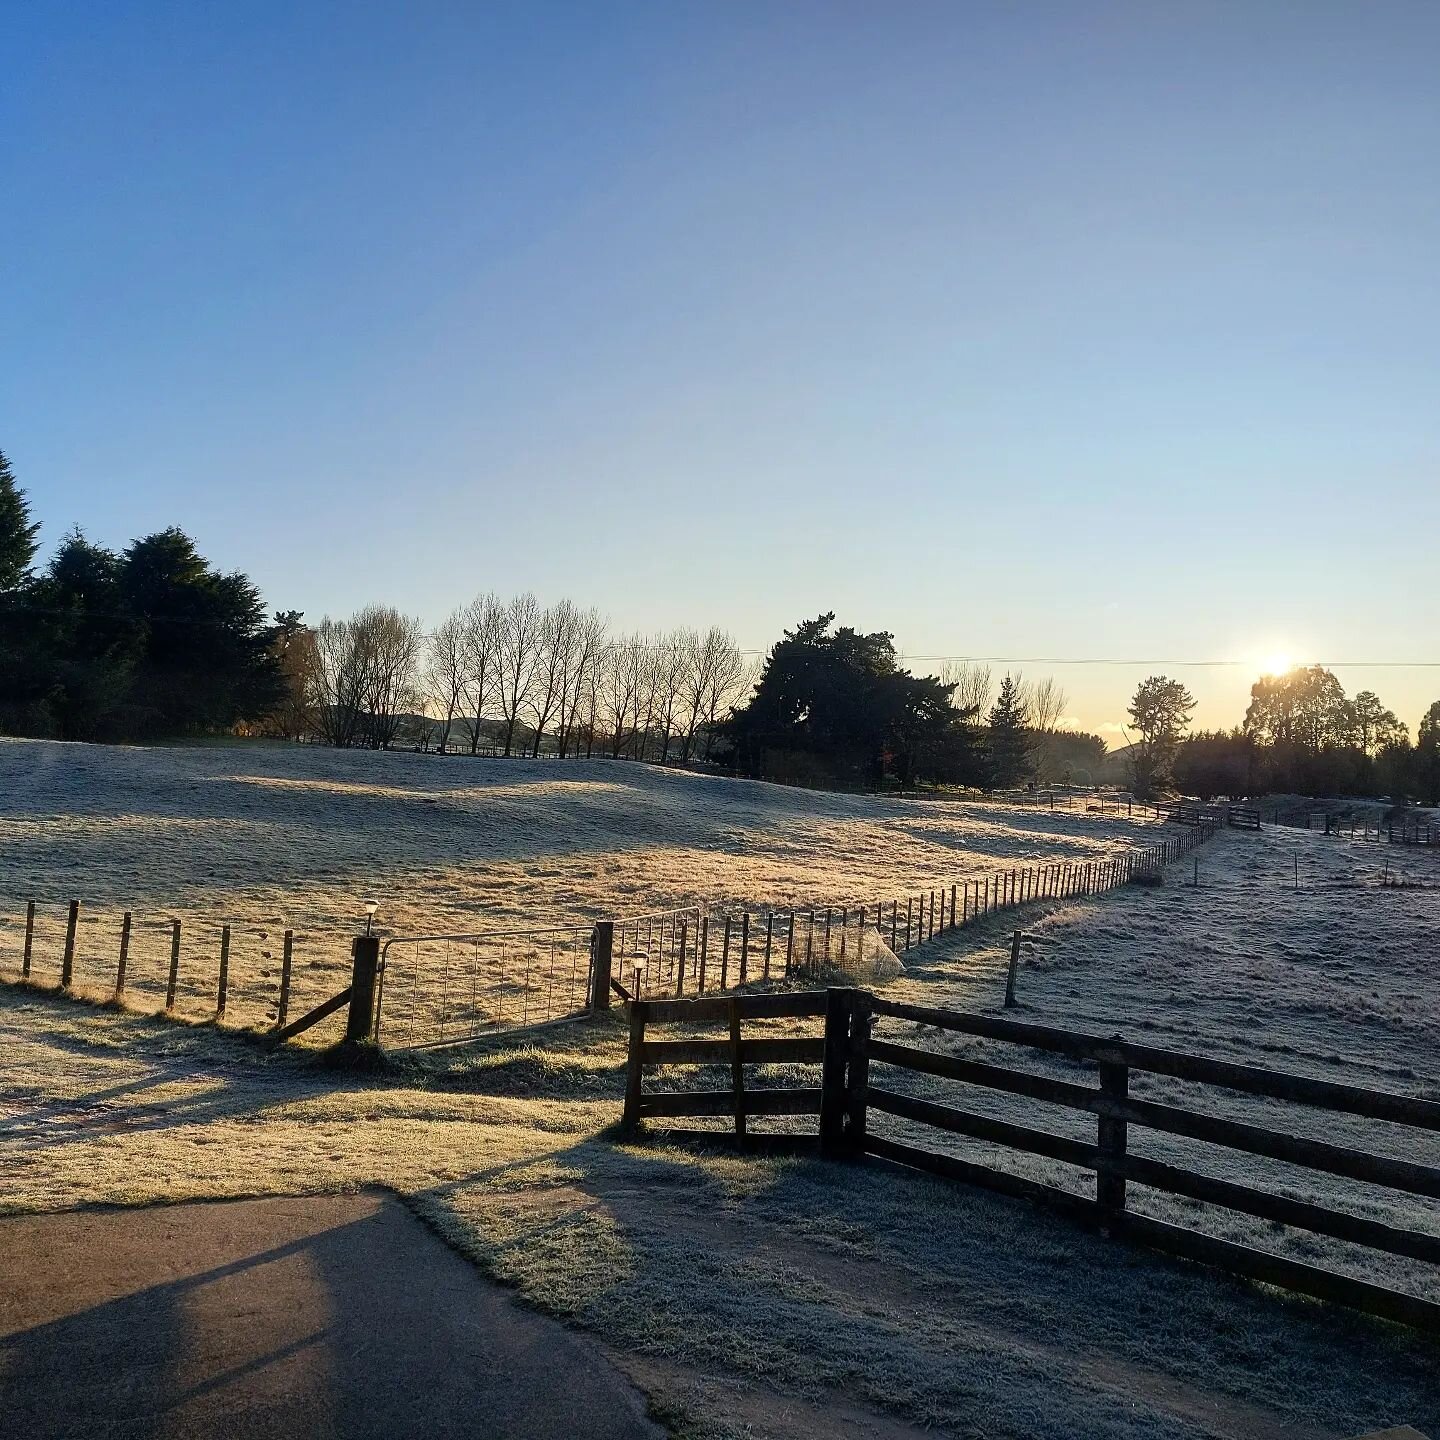 A frosty morning out here on our little property! Aren't these sunny days just so good for the soul!!

#foodie #lifestyle #rural #chefslife #almostspring #aucklandeats #privatechef #lovetauponz #greatlaketaupo #taupochef #taupofood